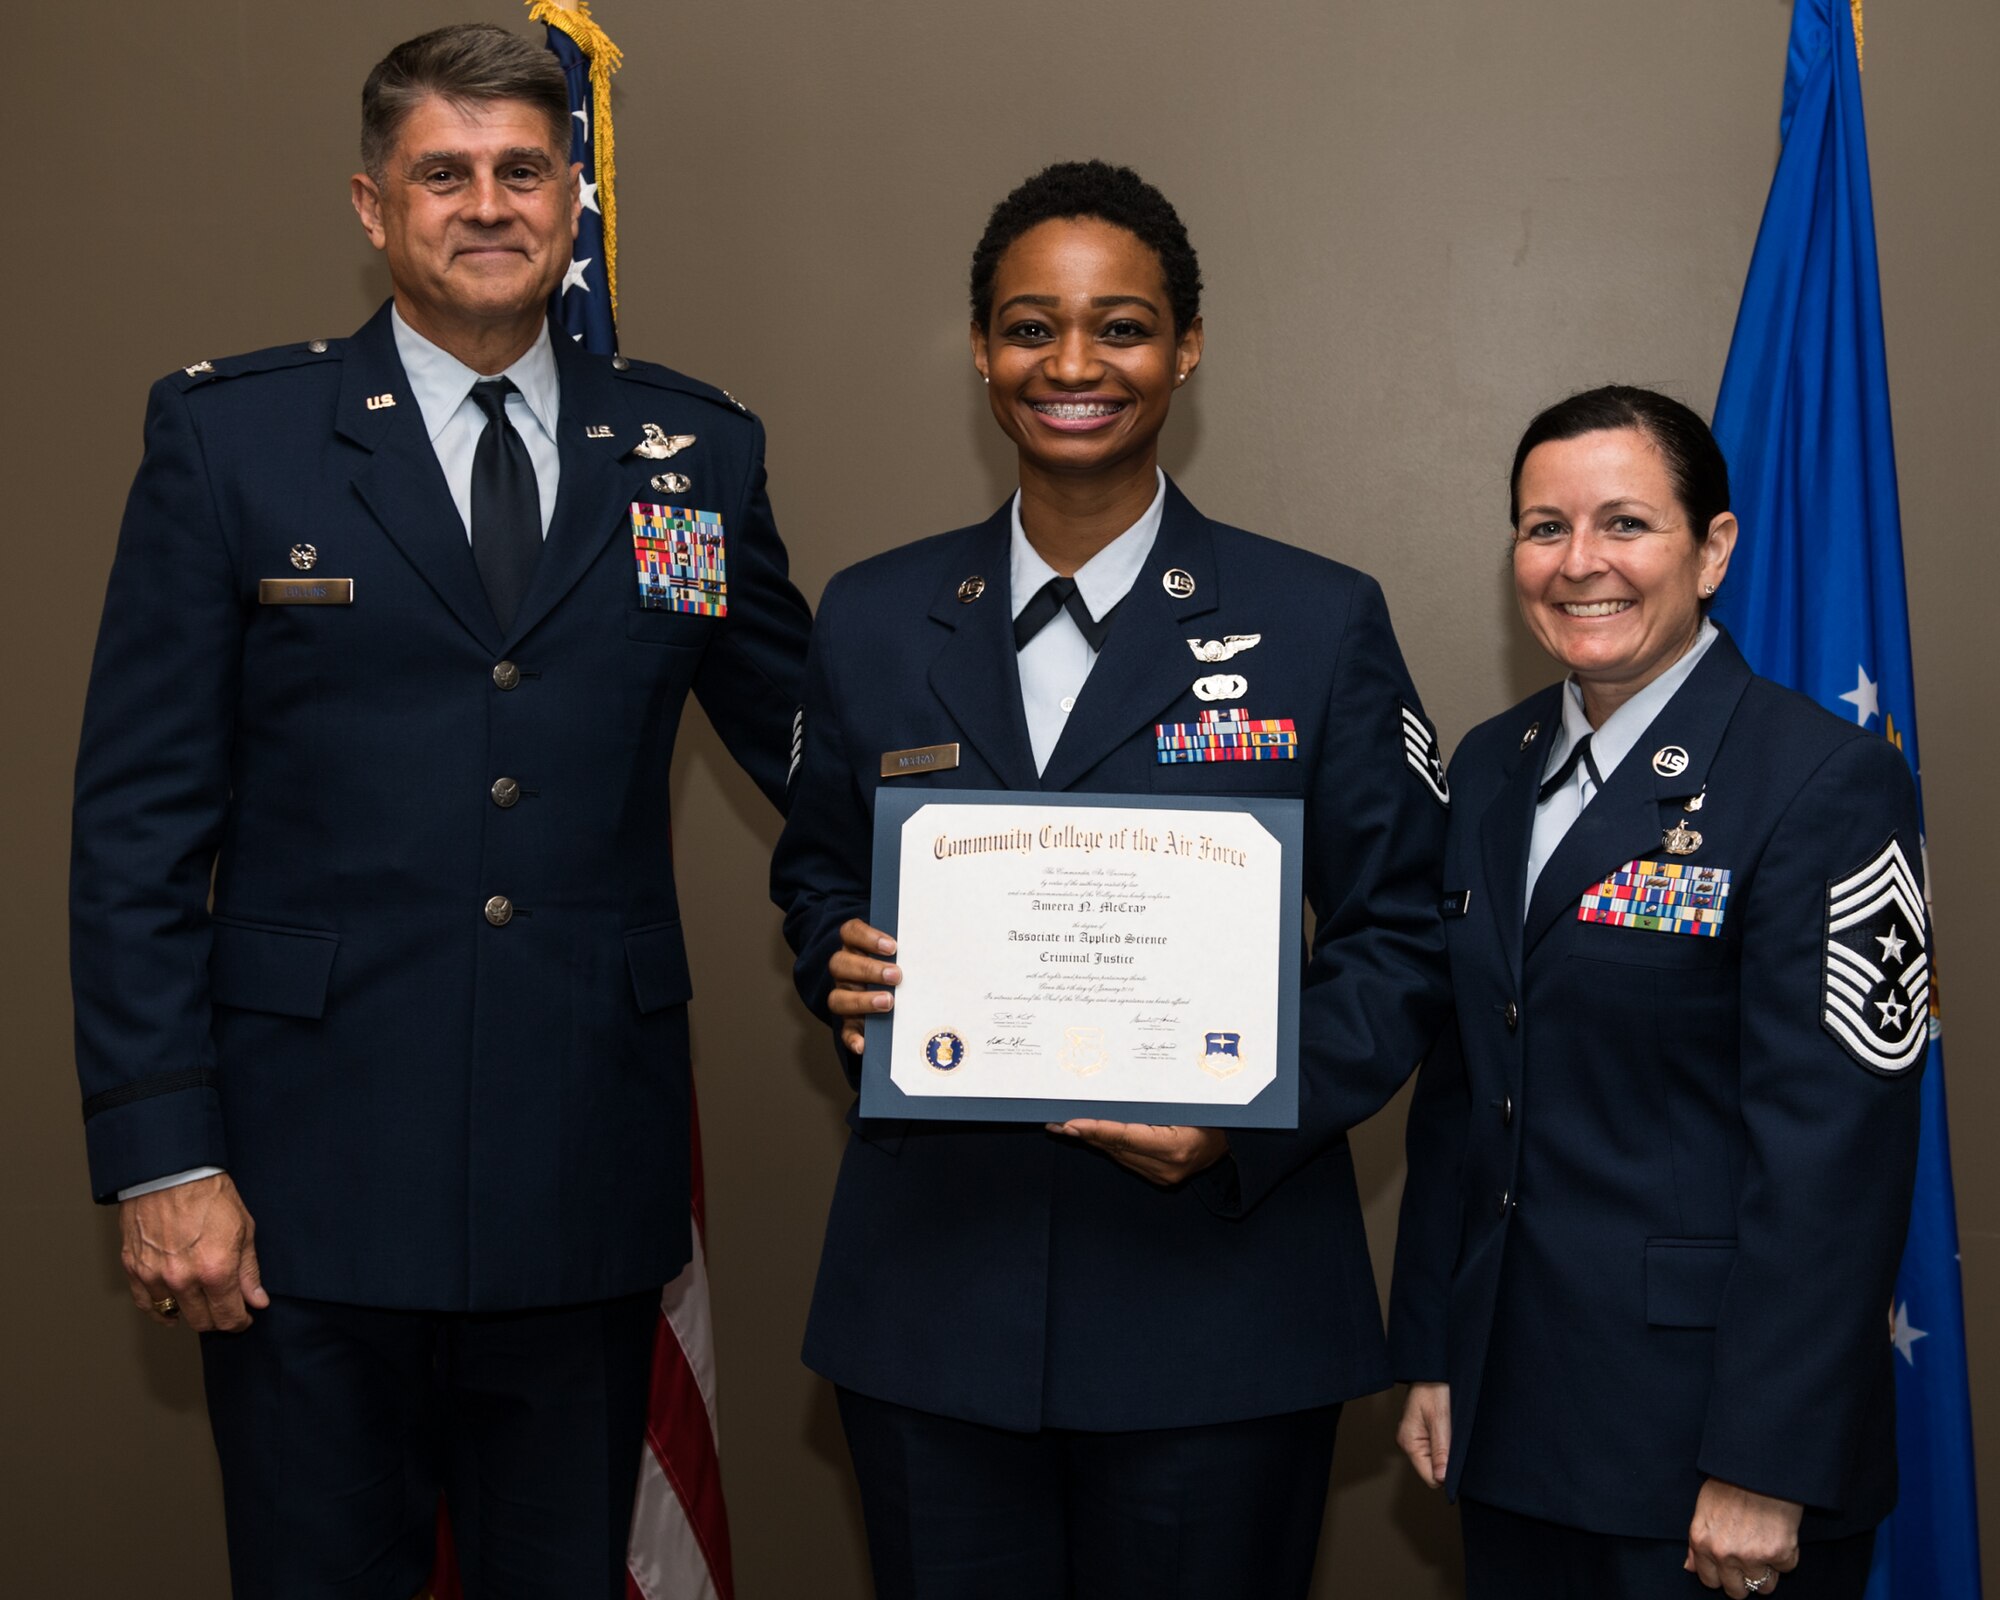 Staff Sgt. Amber McCray, with the 932nd Airlift Wing, receives her Community College of the Air Force associate degree in applied science certificate from 932nd AW commander, Col. Glenn Collins during a CCAF graduation ceremony, June 2, 2019, Scott Air Force Base, Illinois. Wing leadership and fellow Airmen joined the graduates to celebrate their higher education accomplishment. (U.S. Air Force photo by Master Sgt. Christopher Parr)